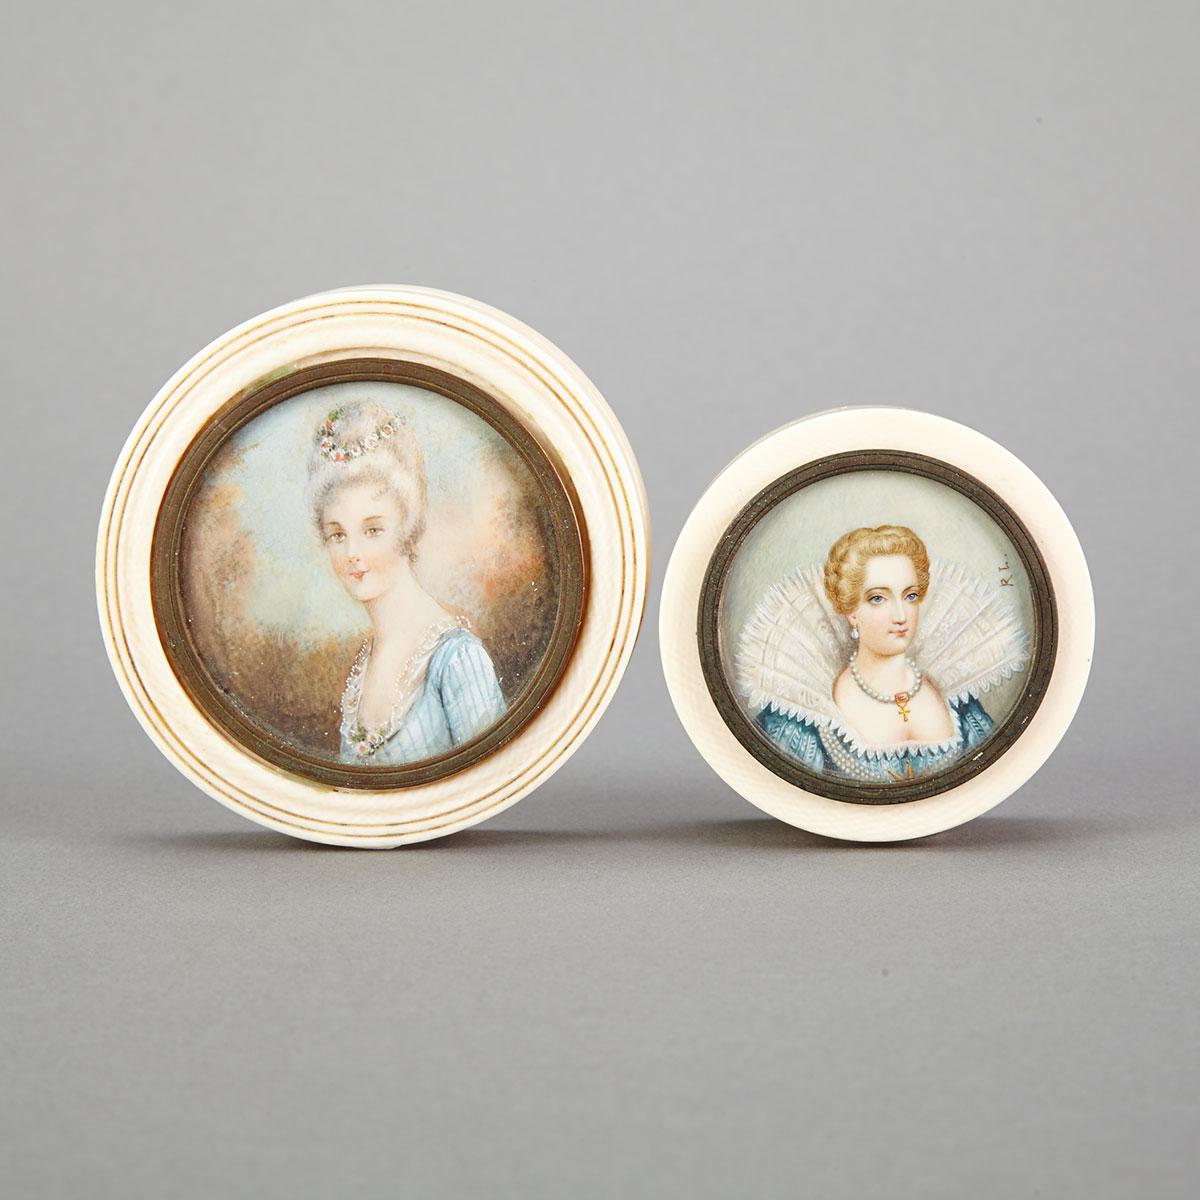 Two French Ivory Portrait Miniature Patch Boxes, early 20th century